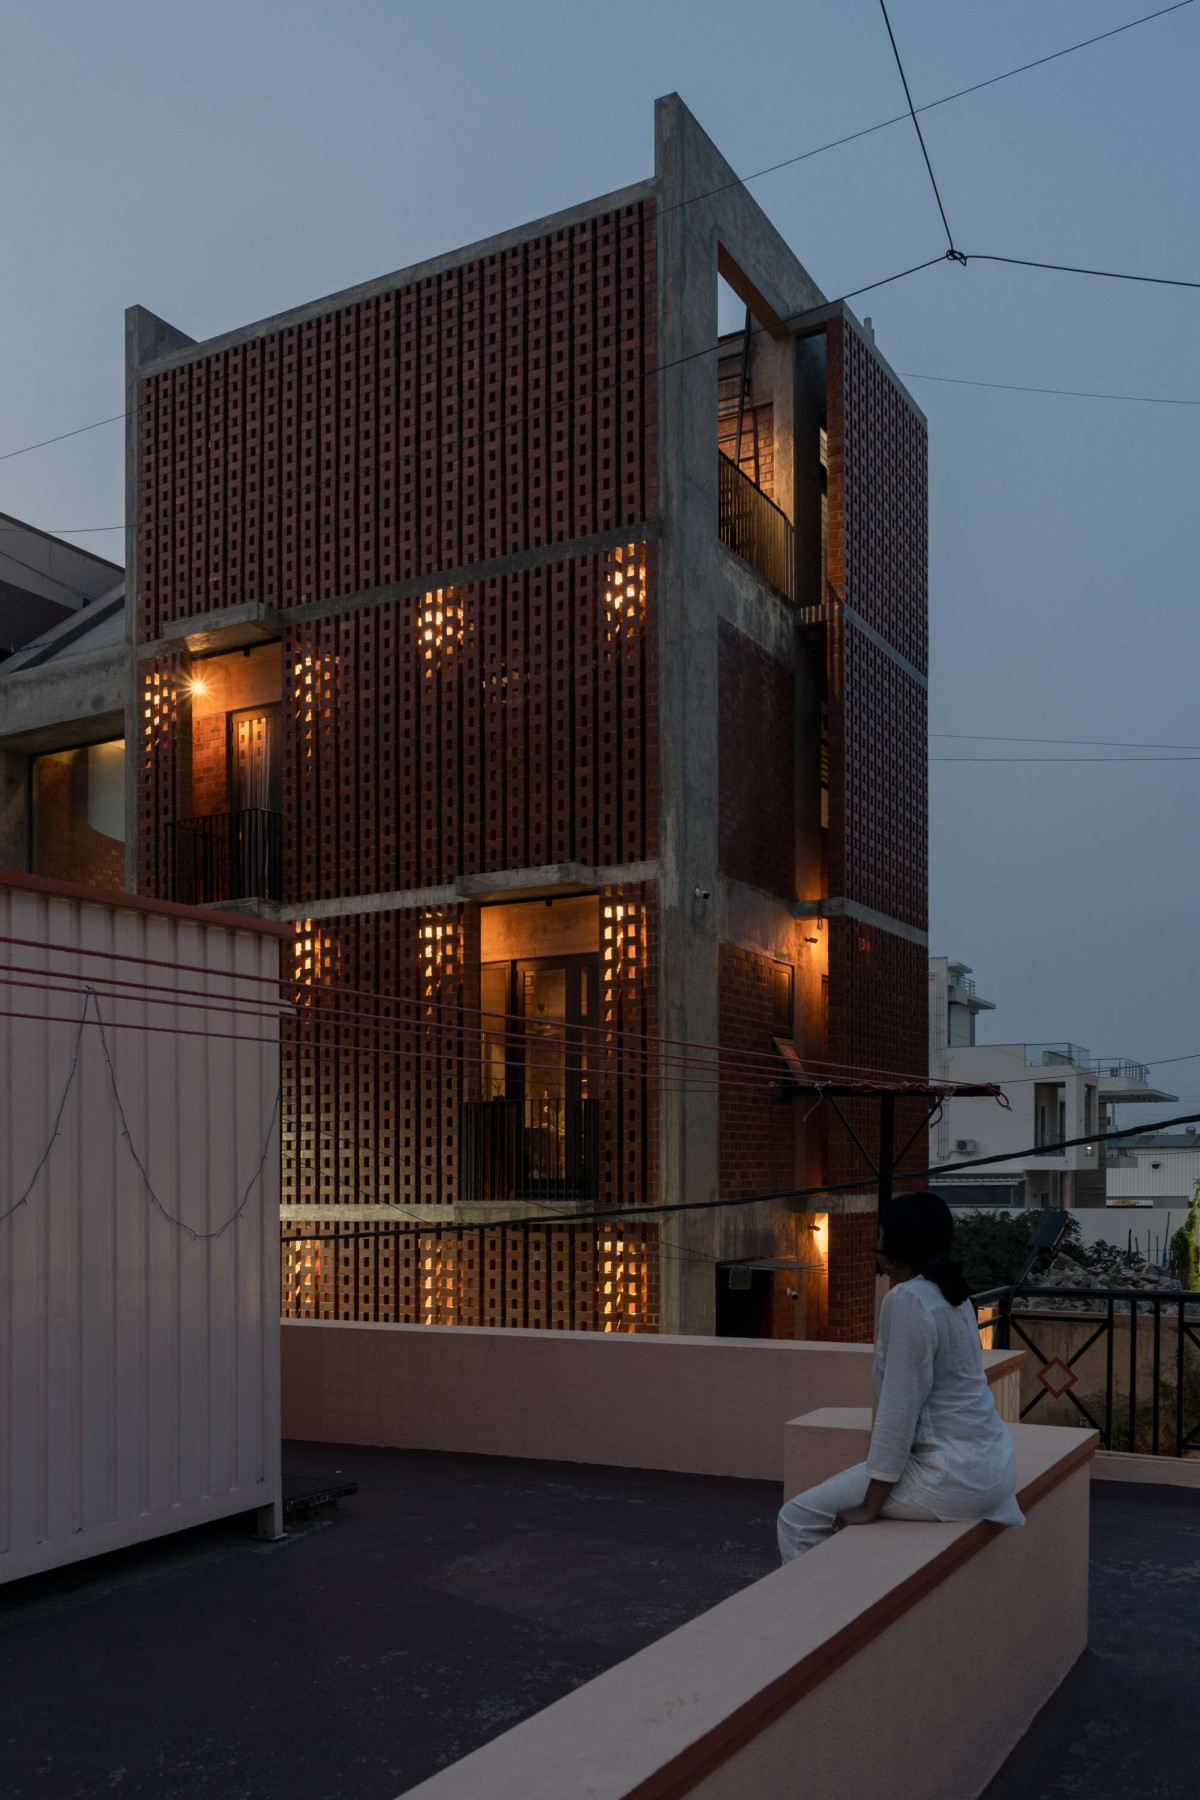 Dusk light exterior view of The Brick House by ShoulderTap